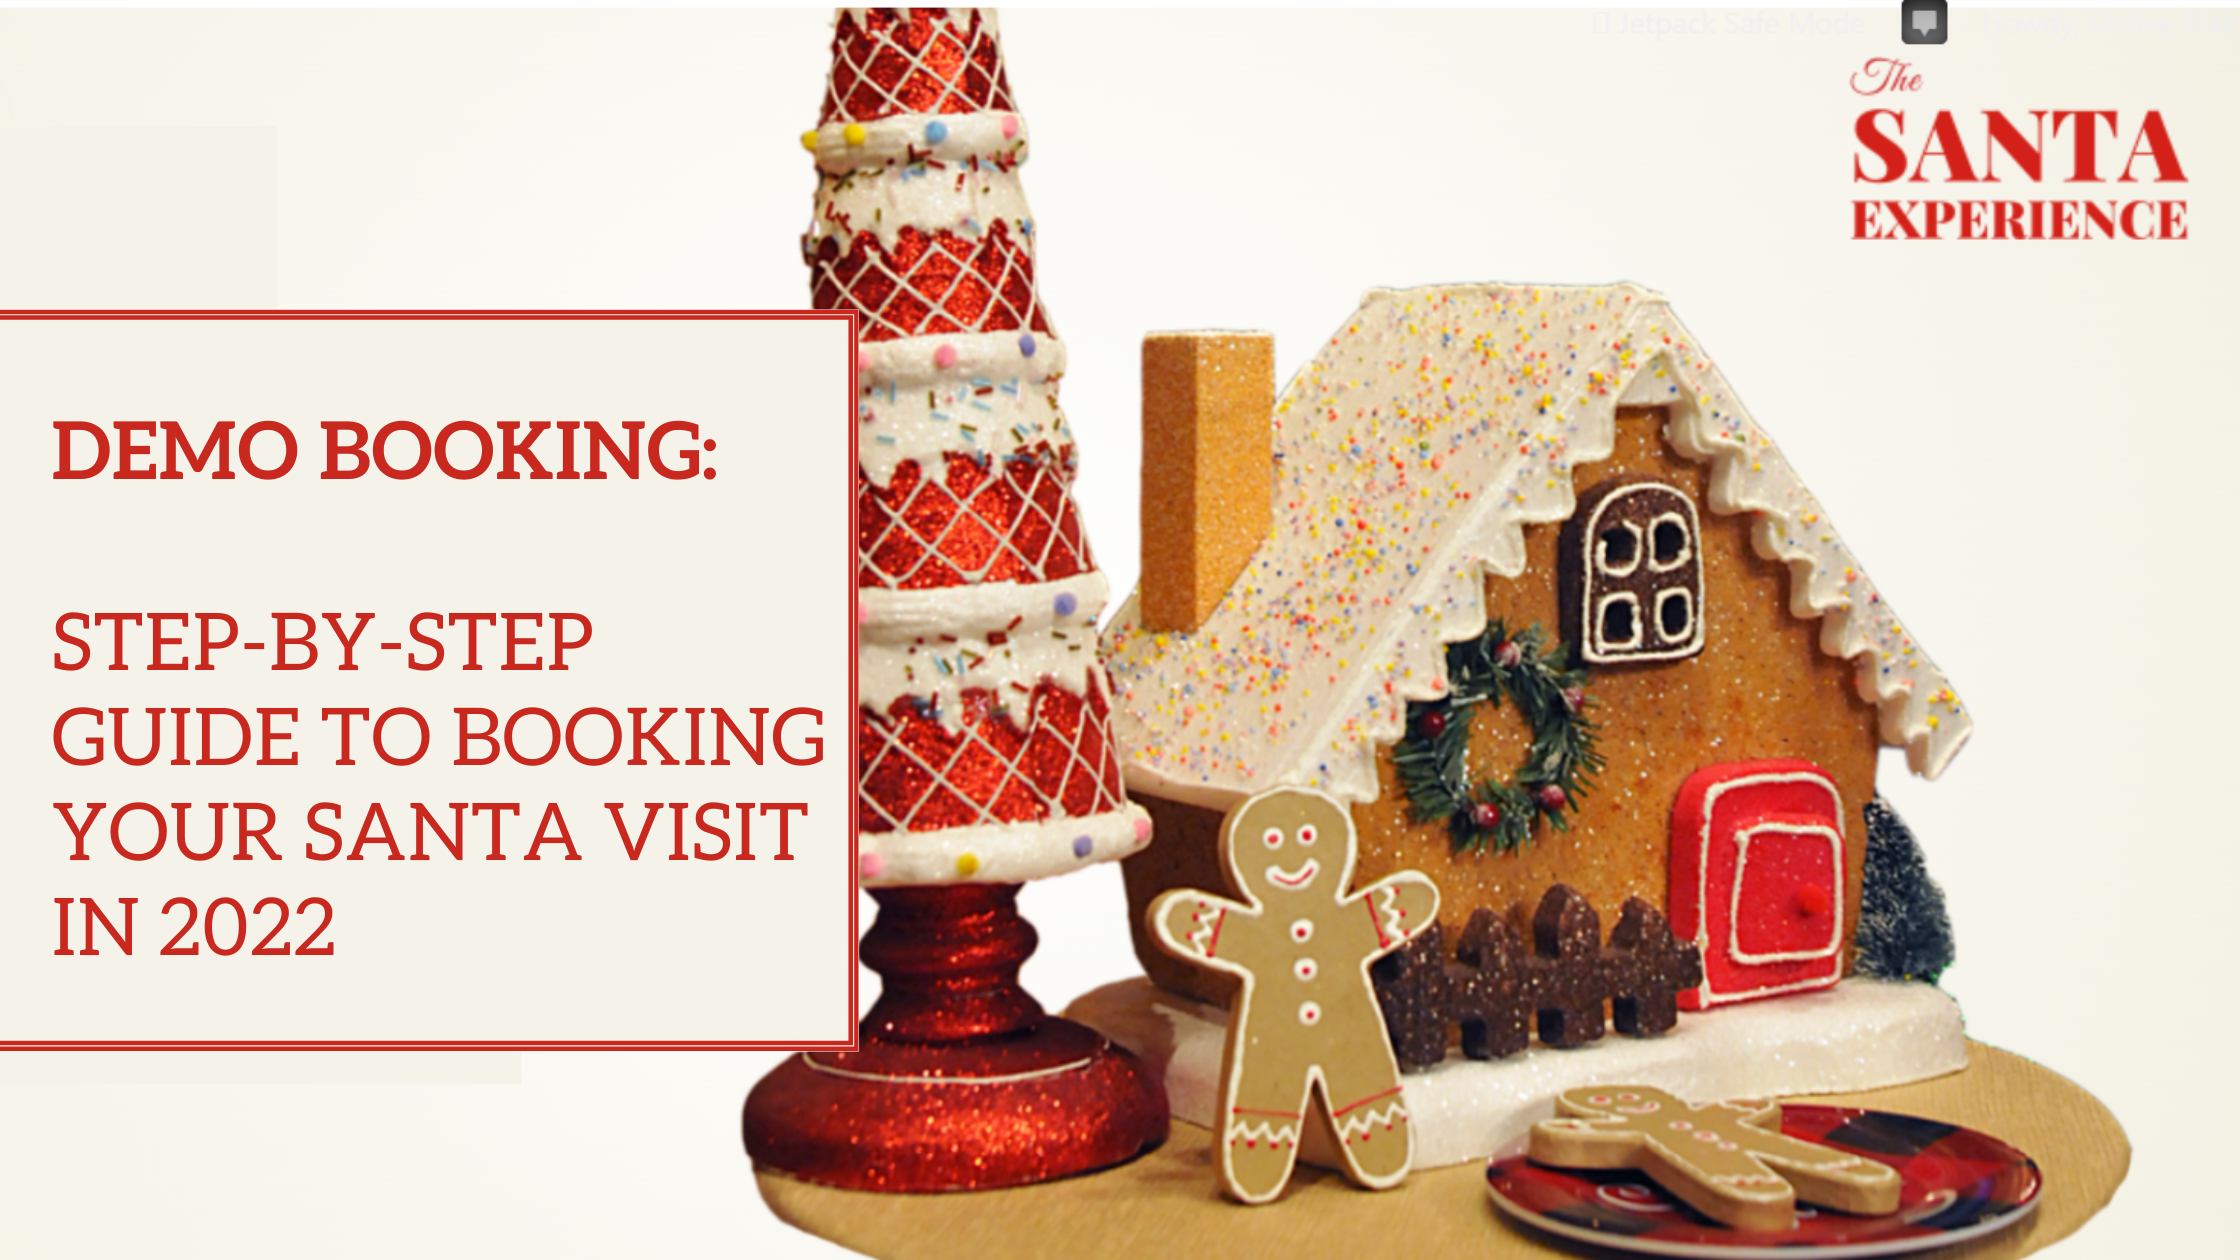 DEMO BOOKING: Step-By-Step Guide to Booking Your Santa Visit in 2022